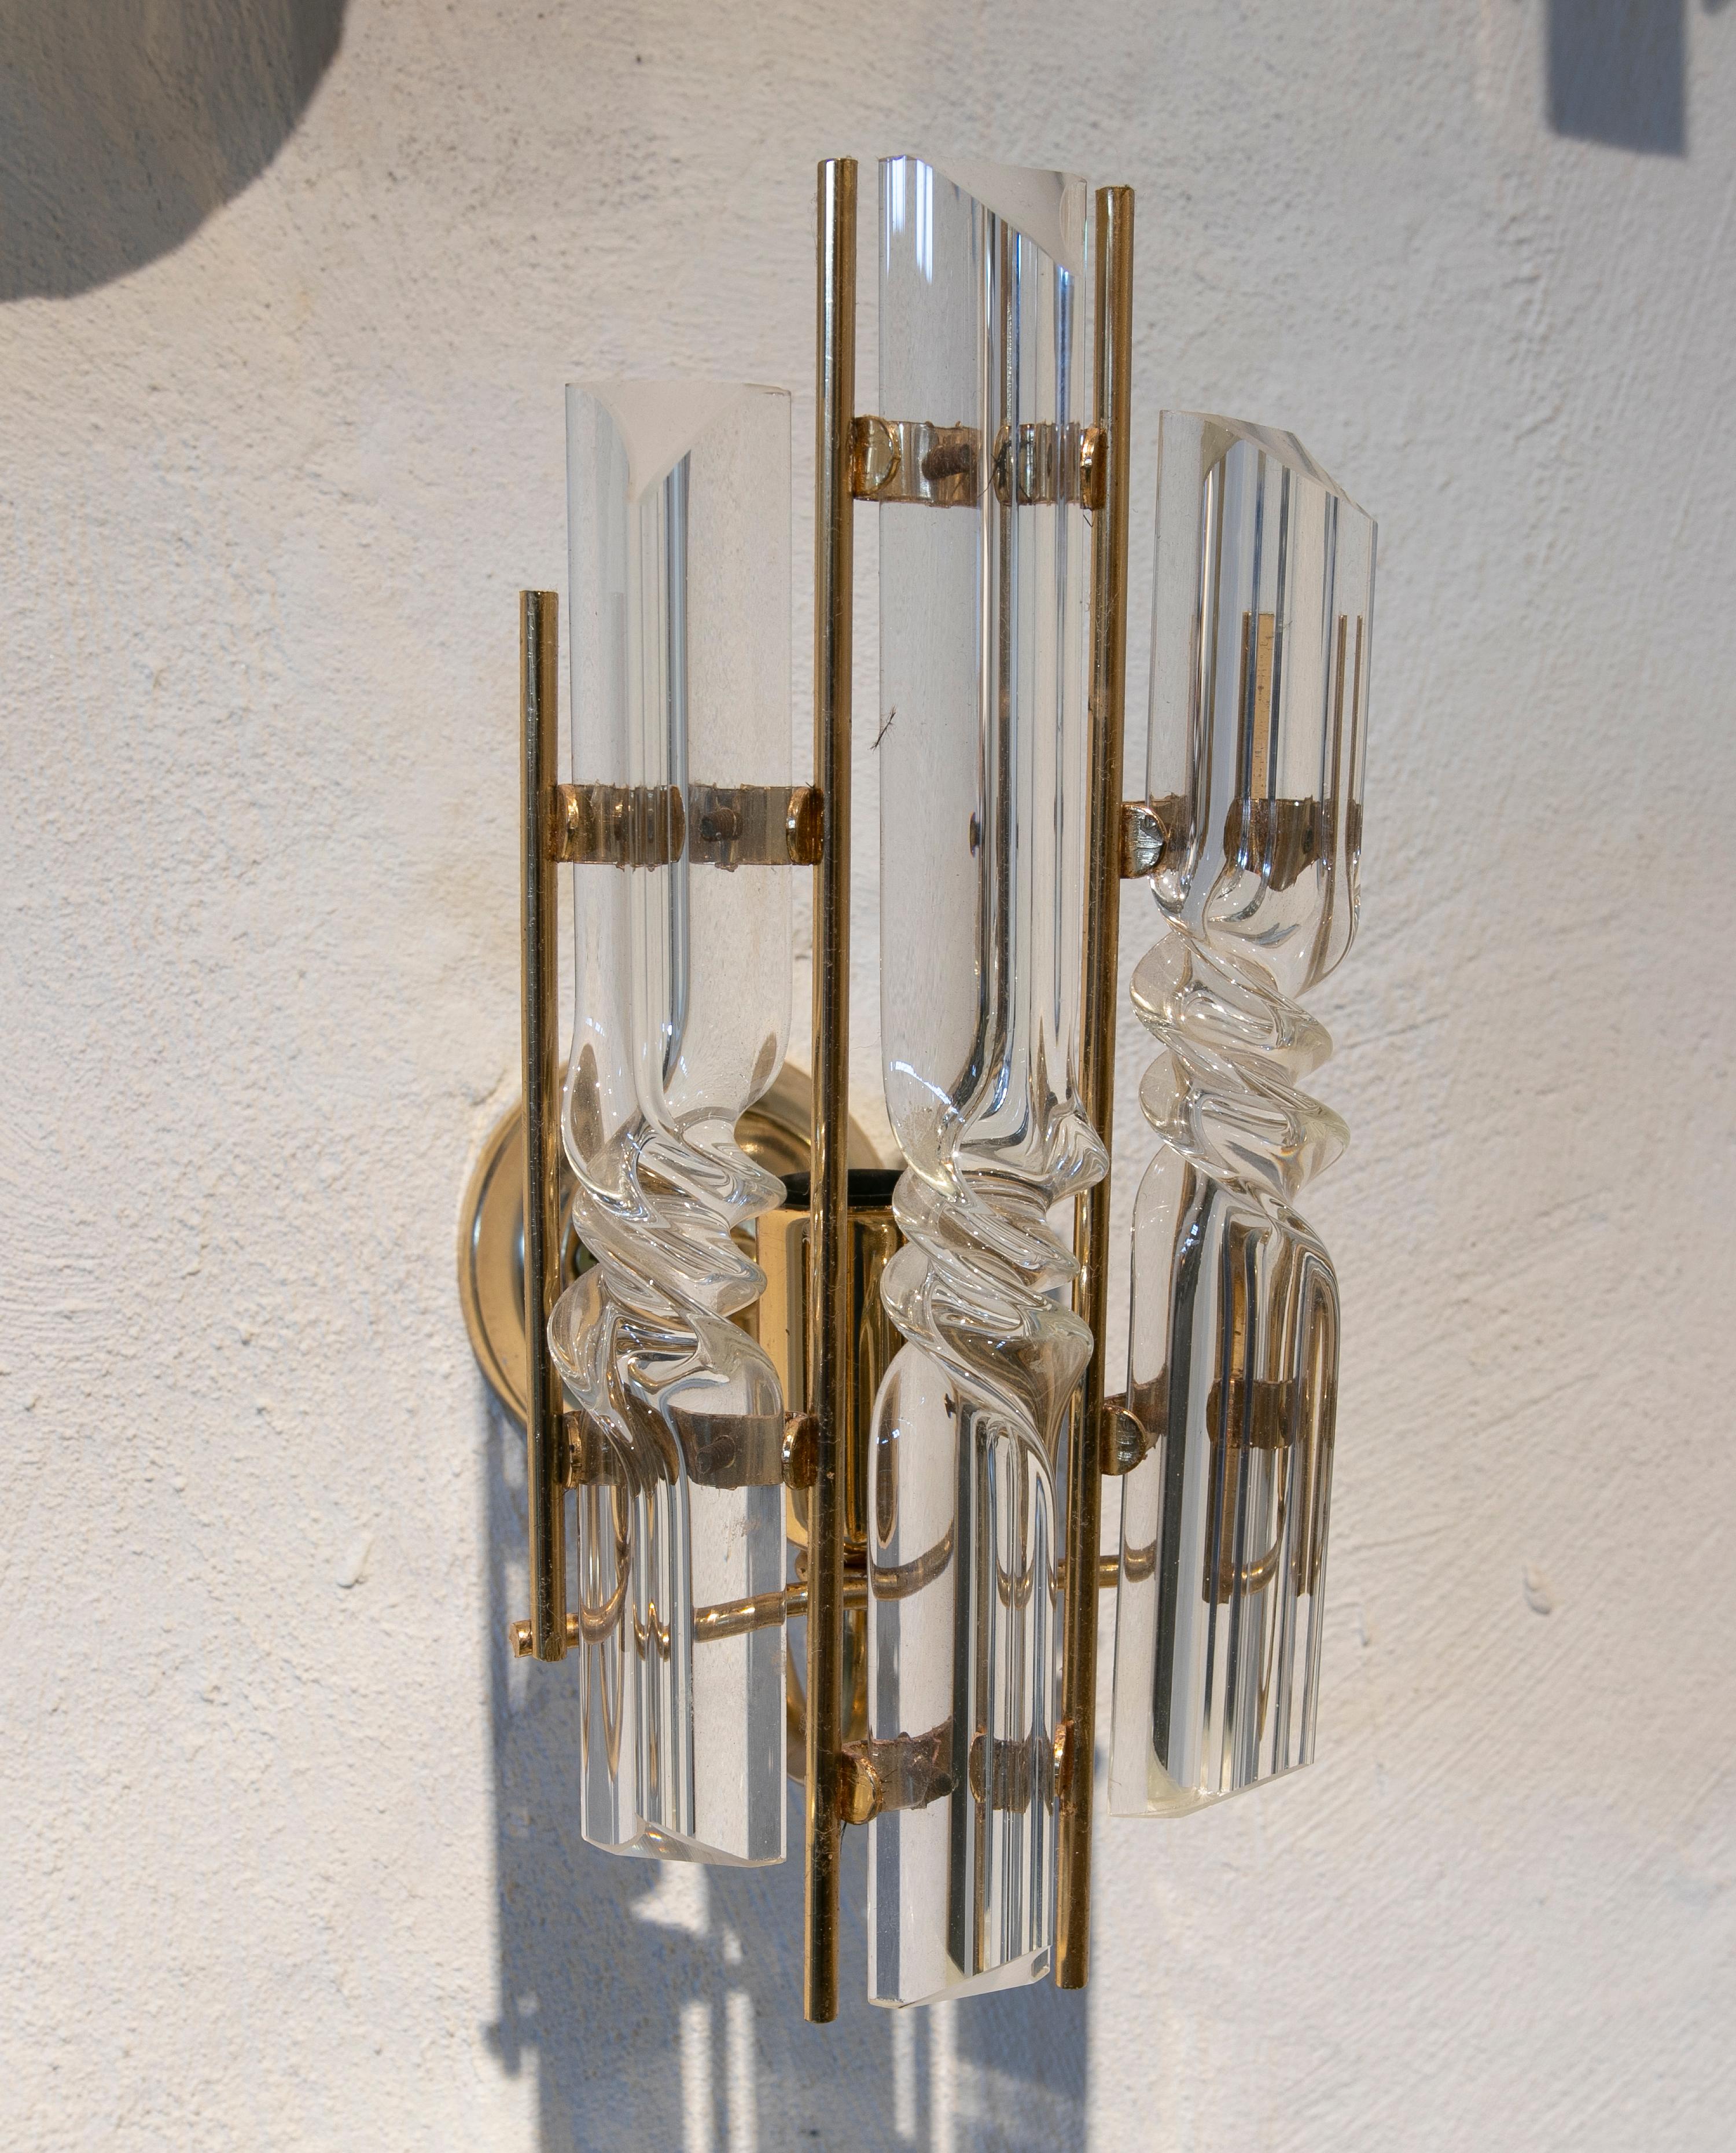 1980s Murano glass wall sconce with Gilted metal stand.